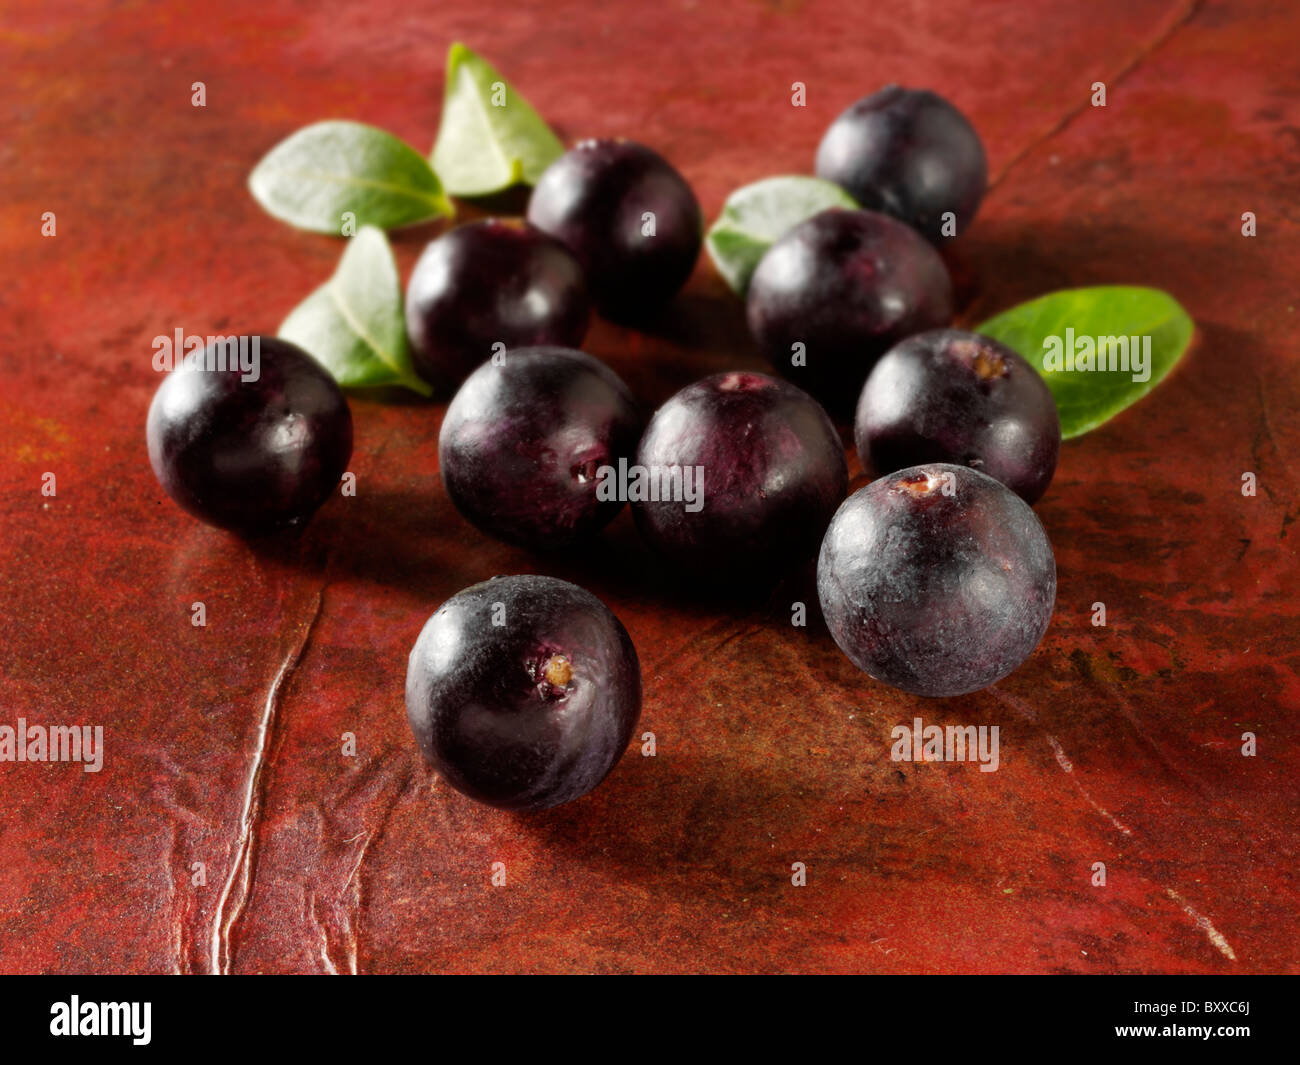 Acai Berries anti oxident fruit loose on a brown background Stock Photo